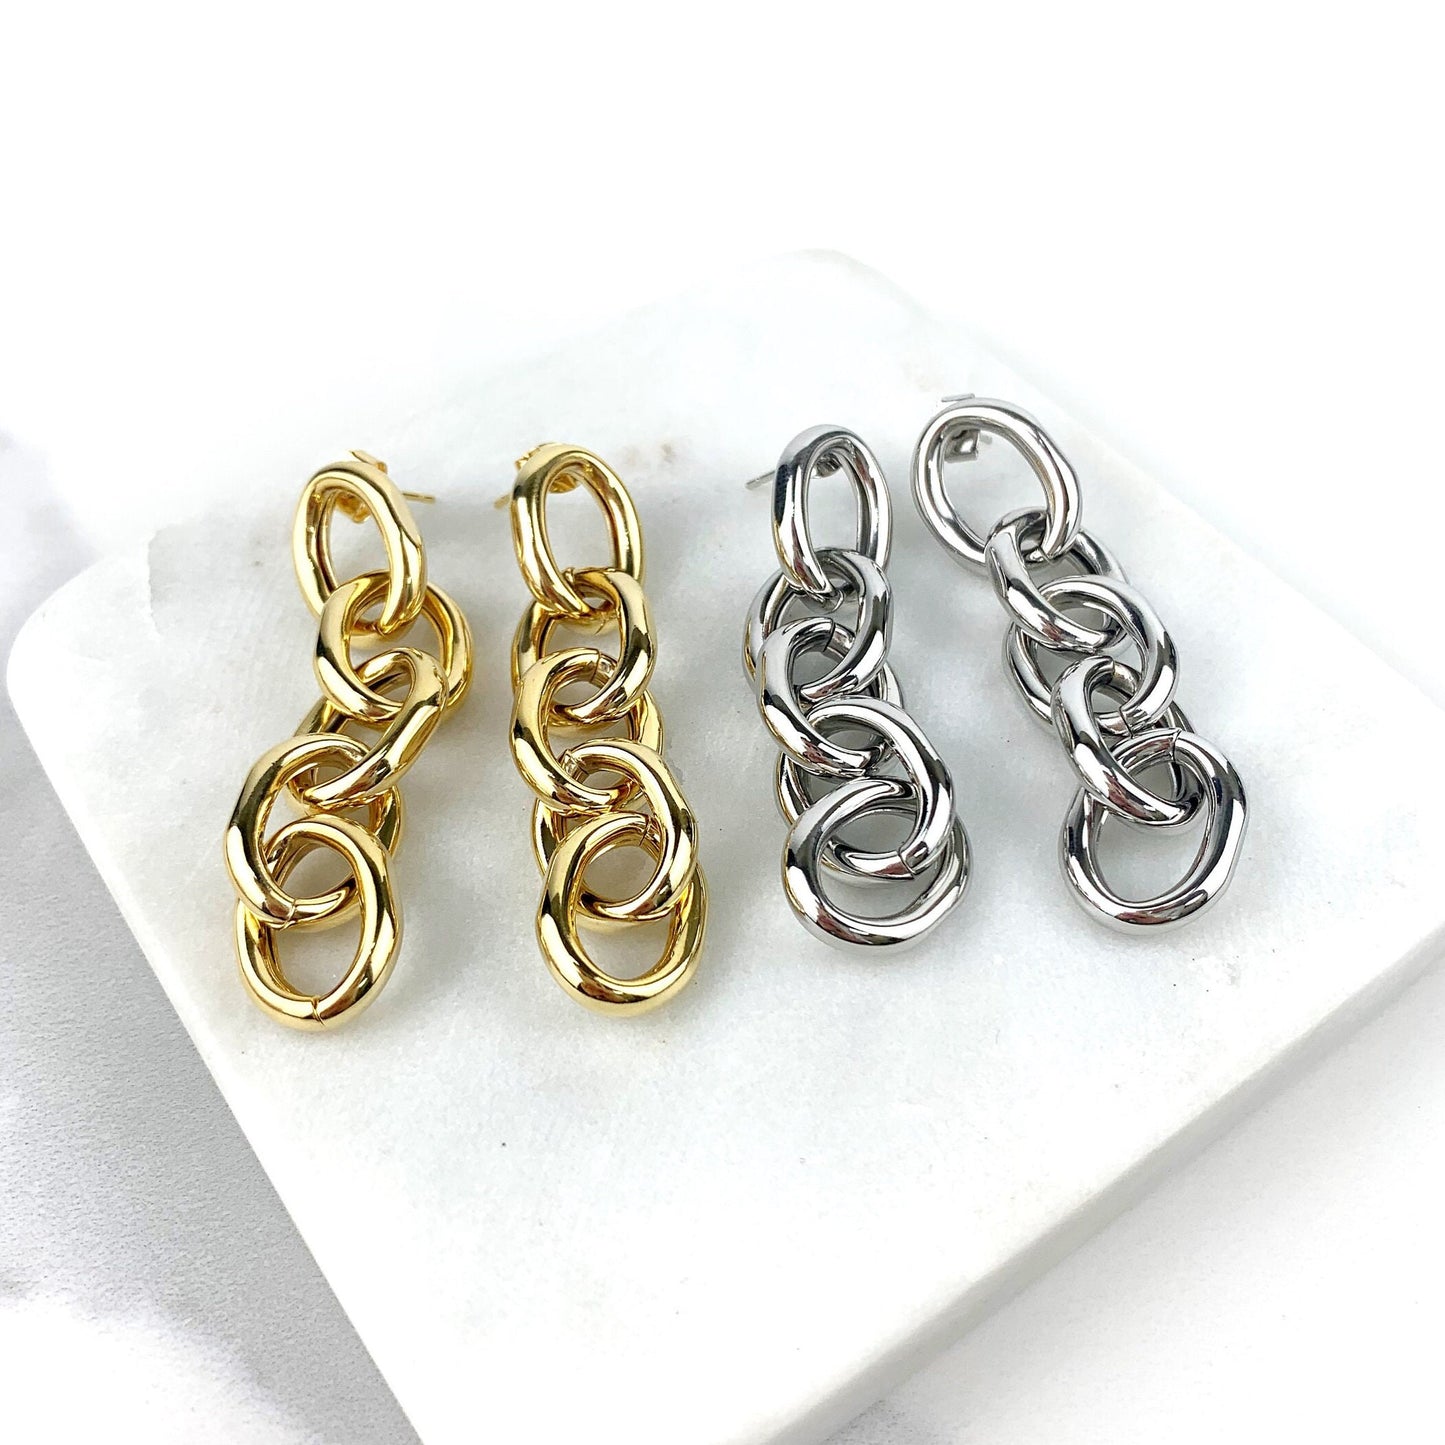 18k Gold Filled or White Gold Filled Oval Linked Chain 68mm Length Drop Earrings,  Wholesale Jewelry Making Supplies